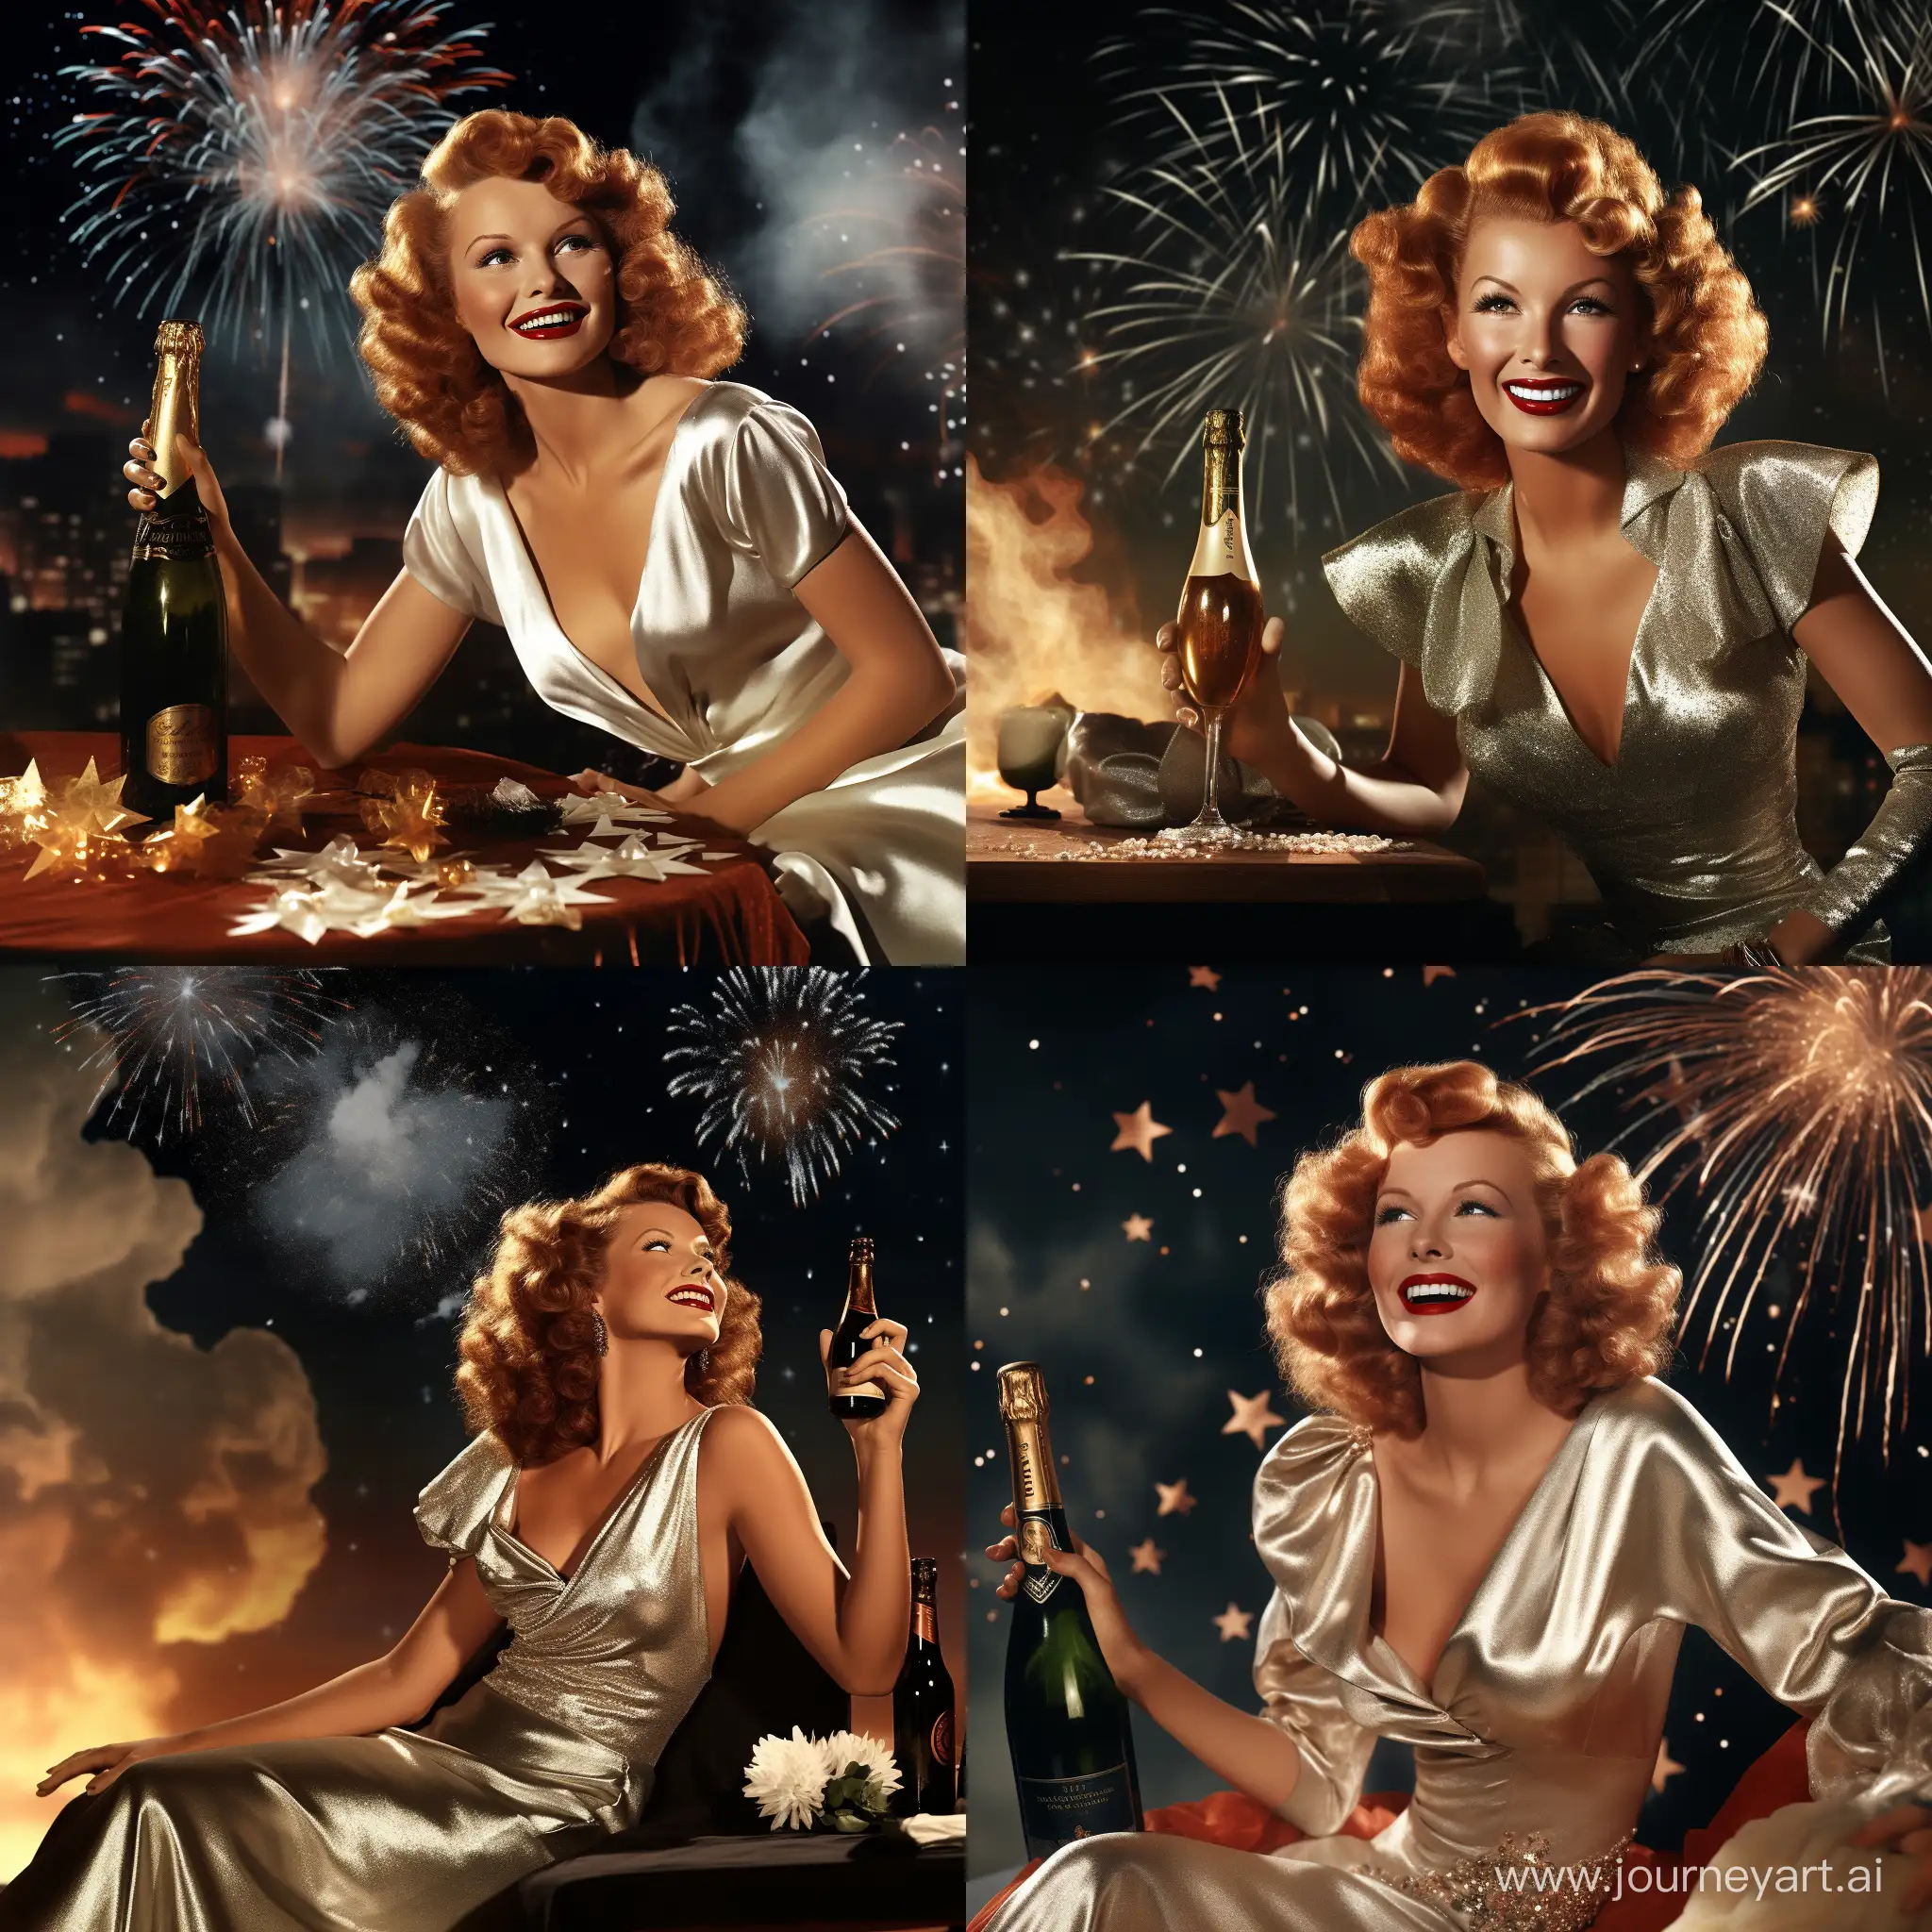 Rita-Hayworth-Celebrates-New-Year-in-Retro-Style-with-Champagne-and-Fireworks